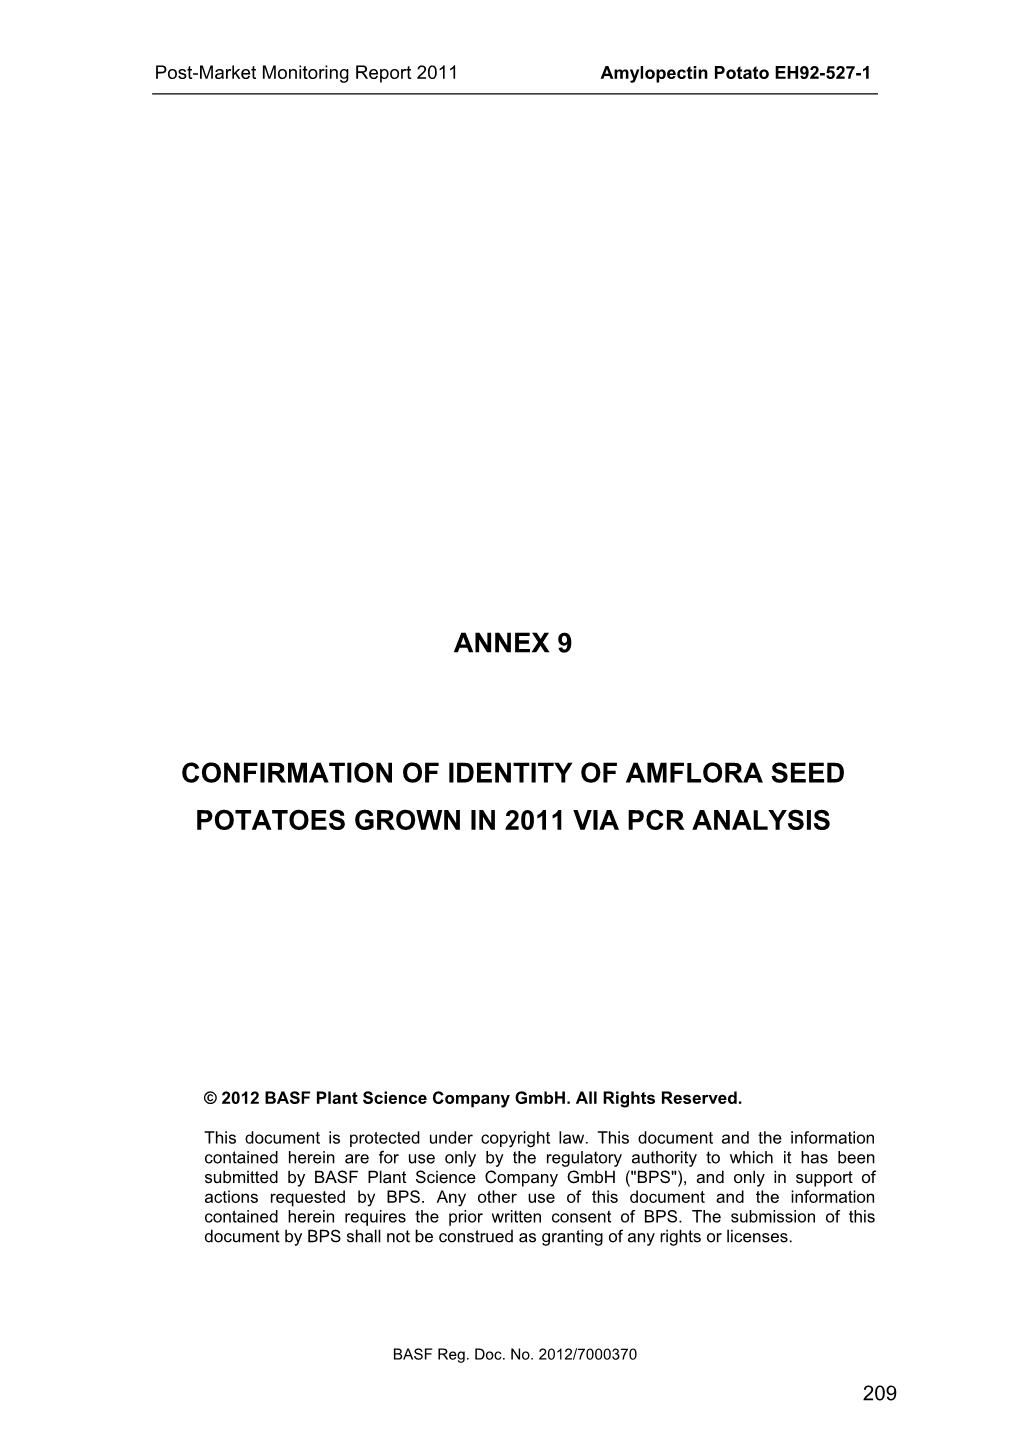 Annex 9 Confirmation of Identity of Amflora Seed